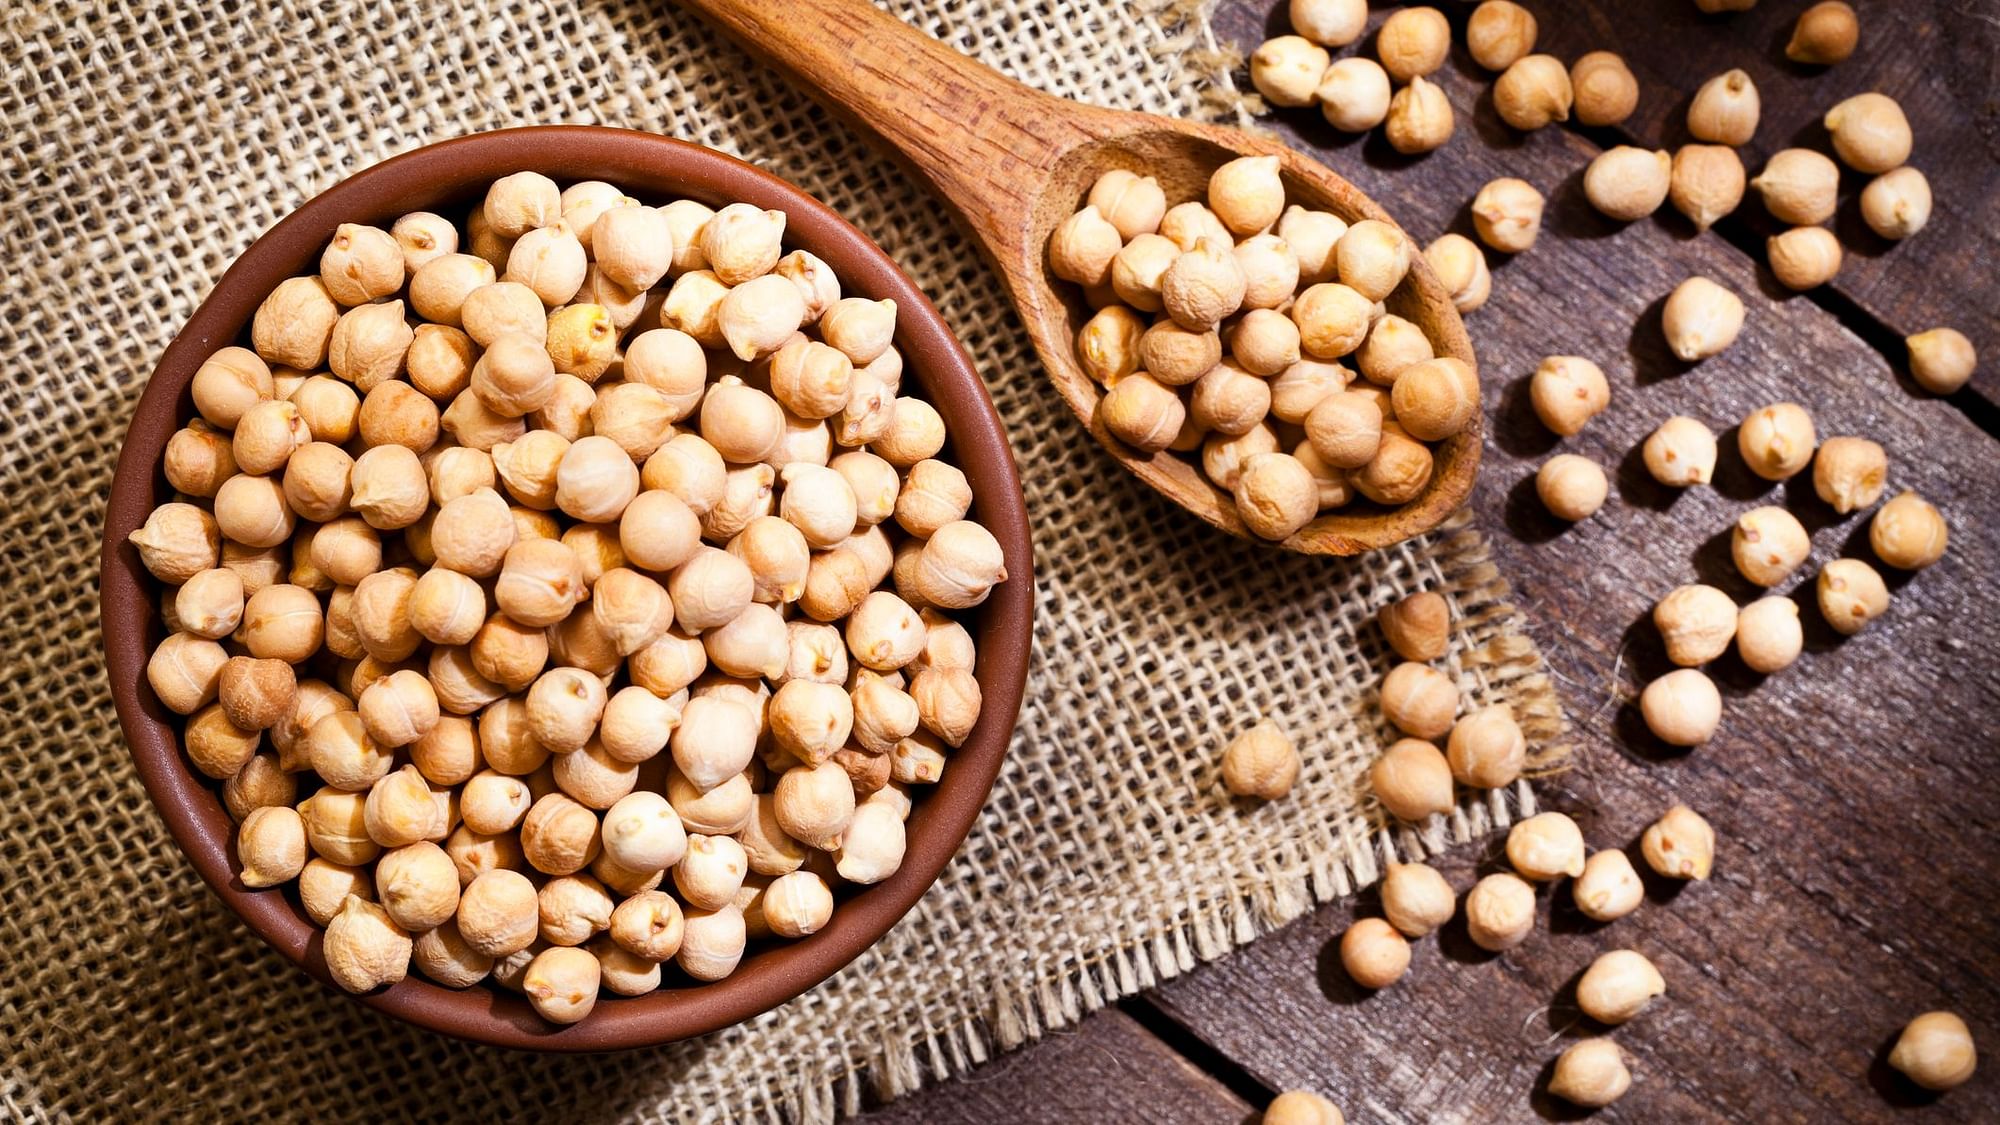 Have a cup of cooked chickpeas in some form thrice a week.